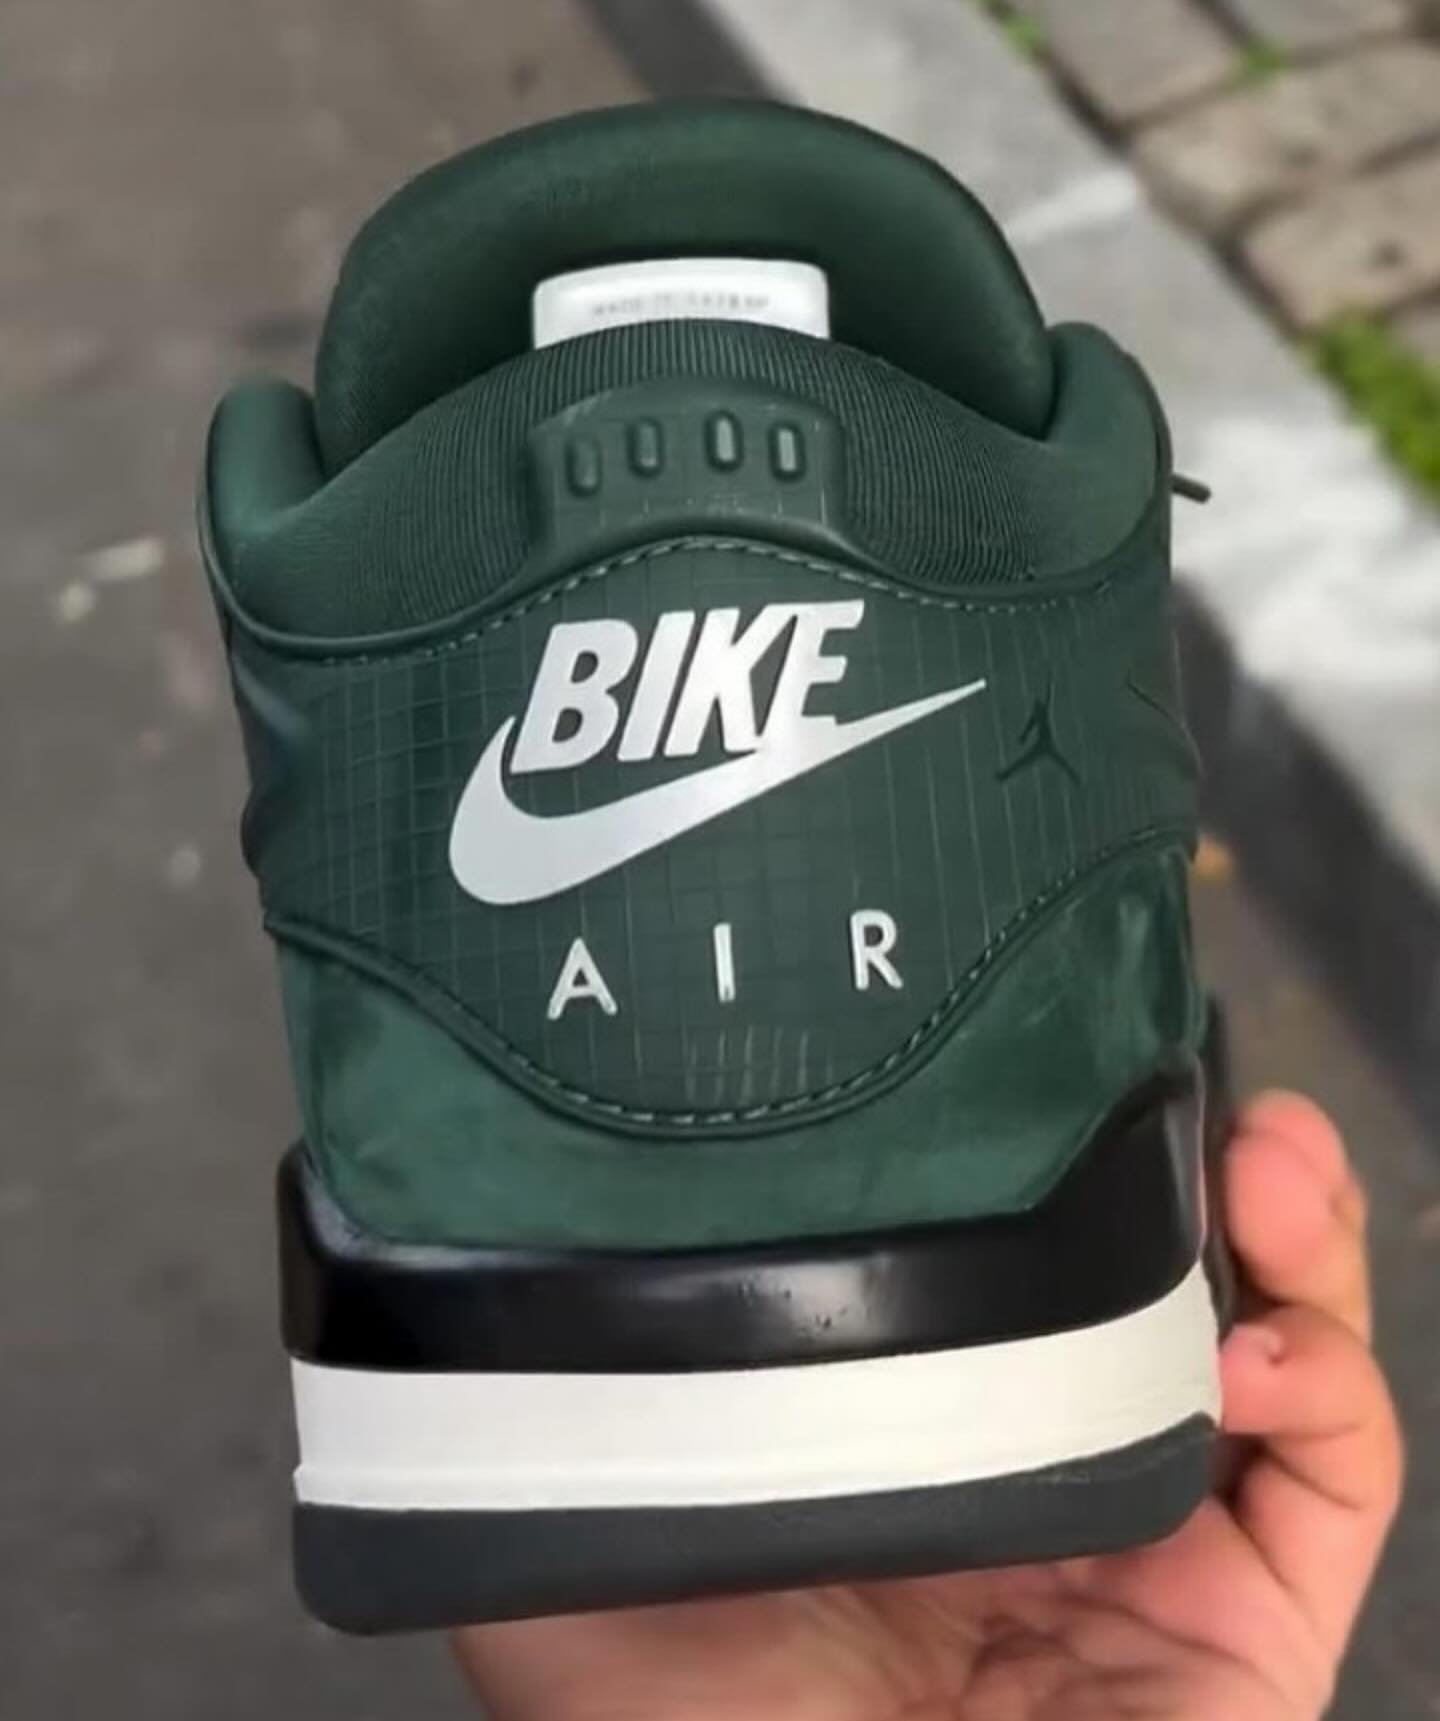 FIRST LOOK 👀 Nigel Sylvester x Air Jordan 4 RM &lsquo;Pro Green&rsquo; 🤩

Rumour is, these land 3RD JULY but yet to be confirmed. 

These look FIRE!! What do you think? 

#SneakerSpott #AirJordan4 #NigelSylvester